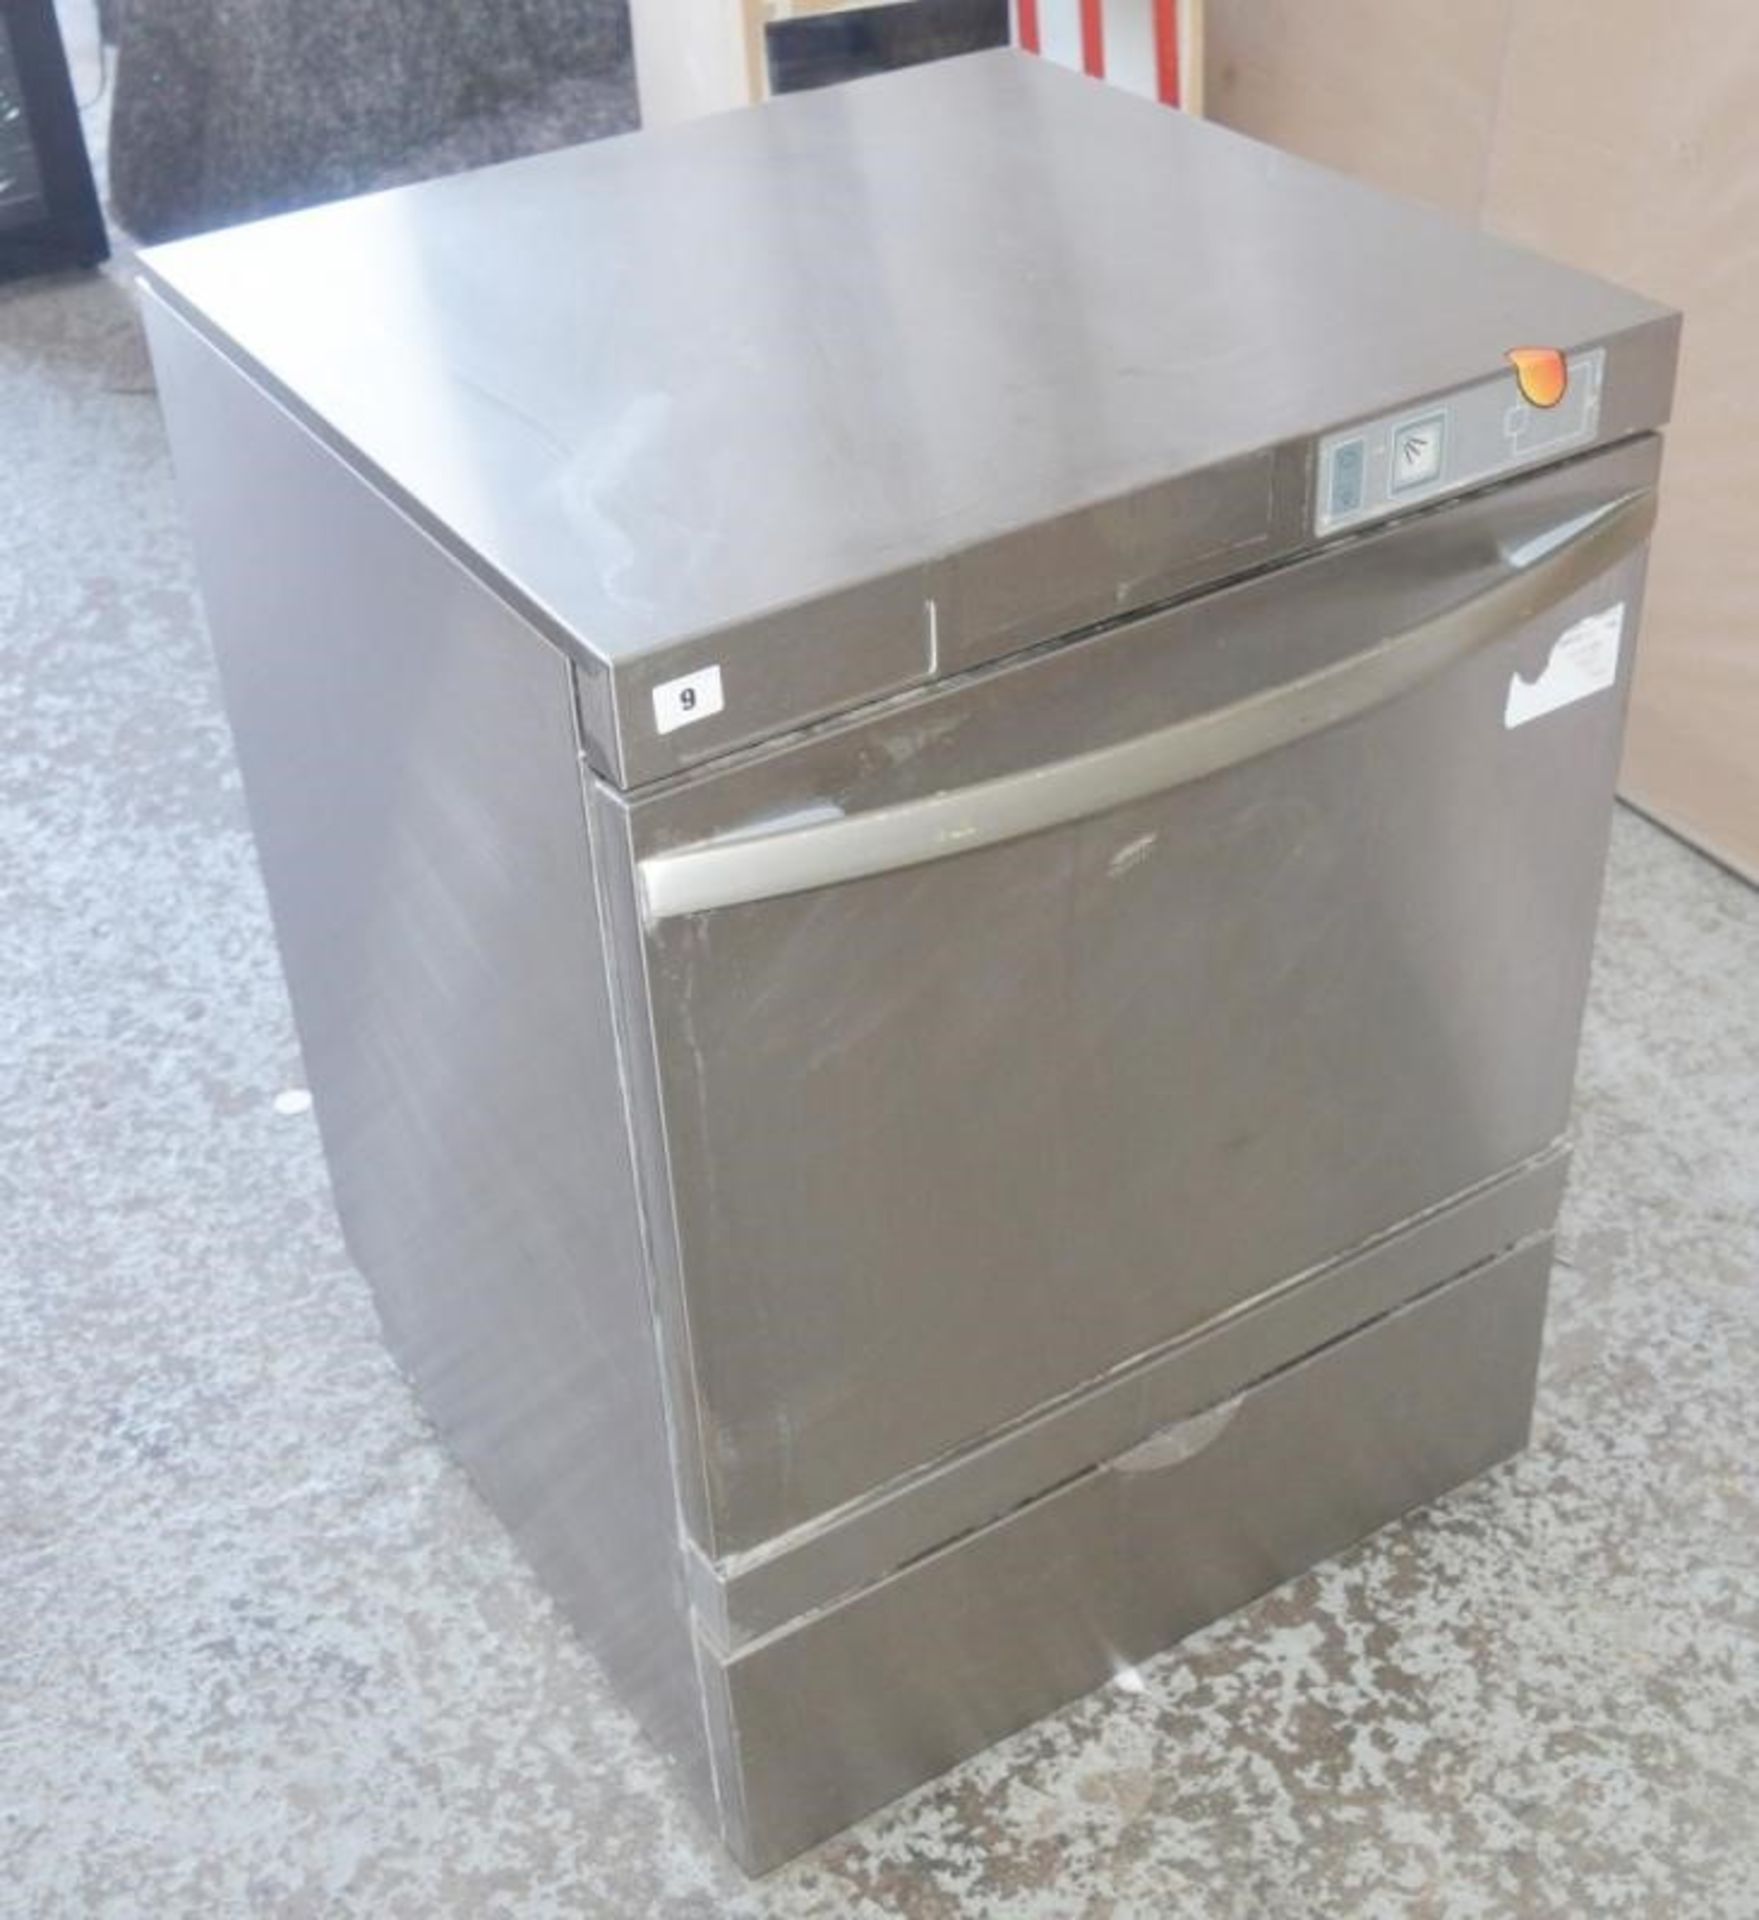 1 x Commercial Dishwasher - Stainless Steel Finish - Ref: IT552 - CL007 - Dimensions: H81 x W60 x D6 - Image 8 of 8